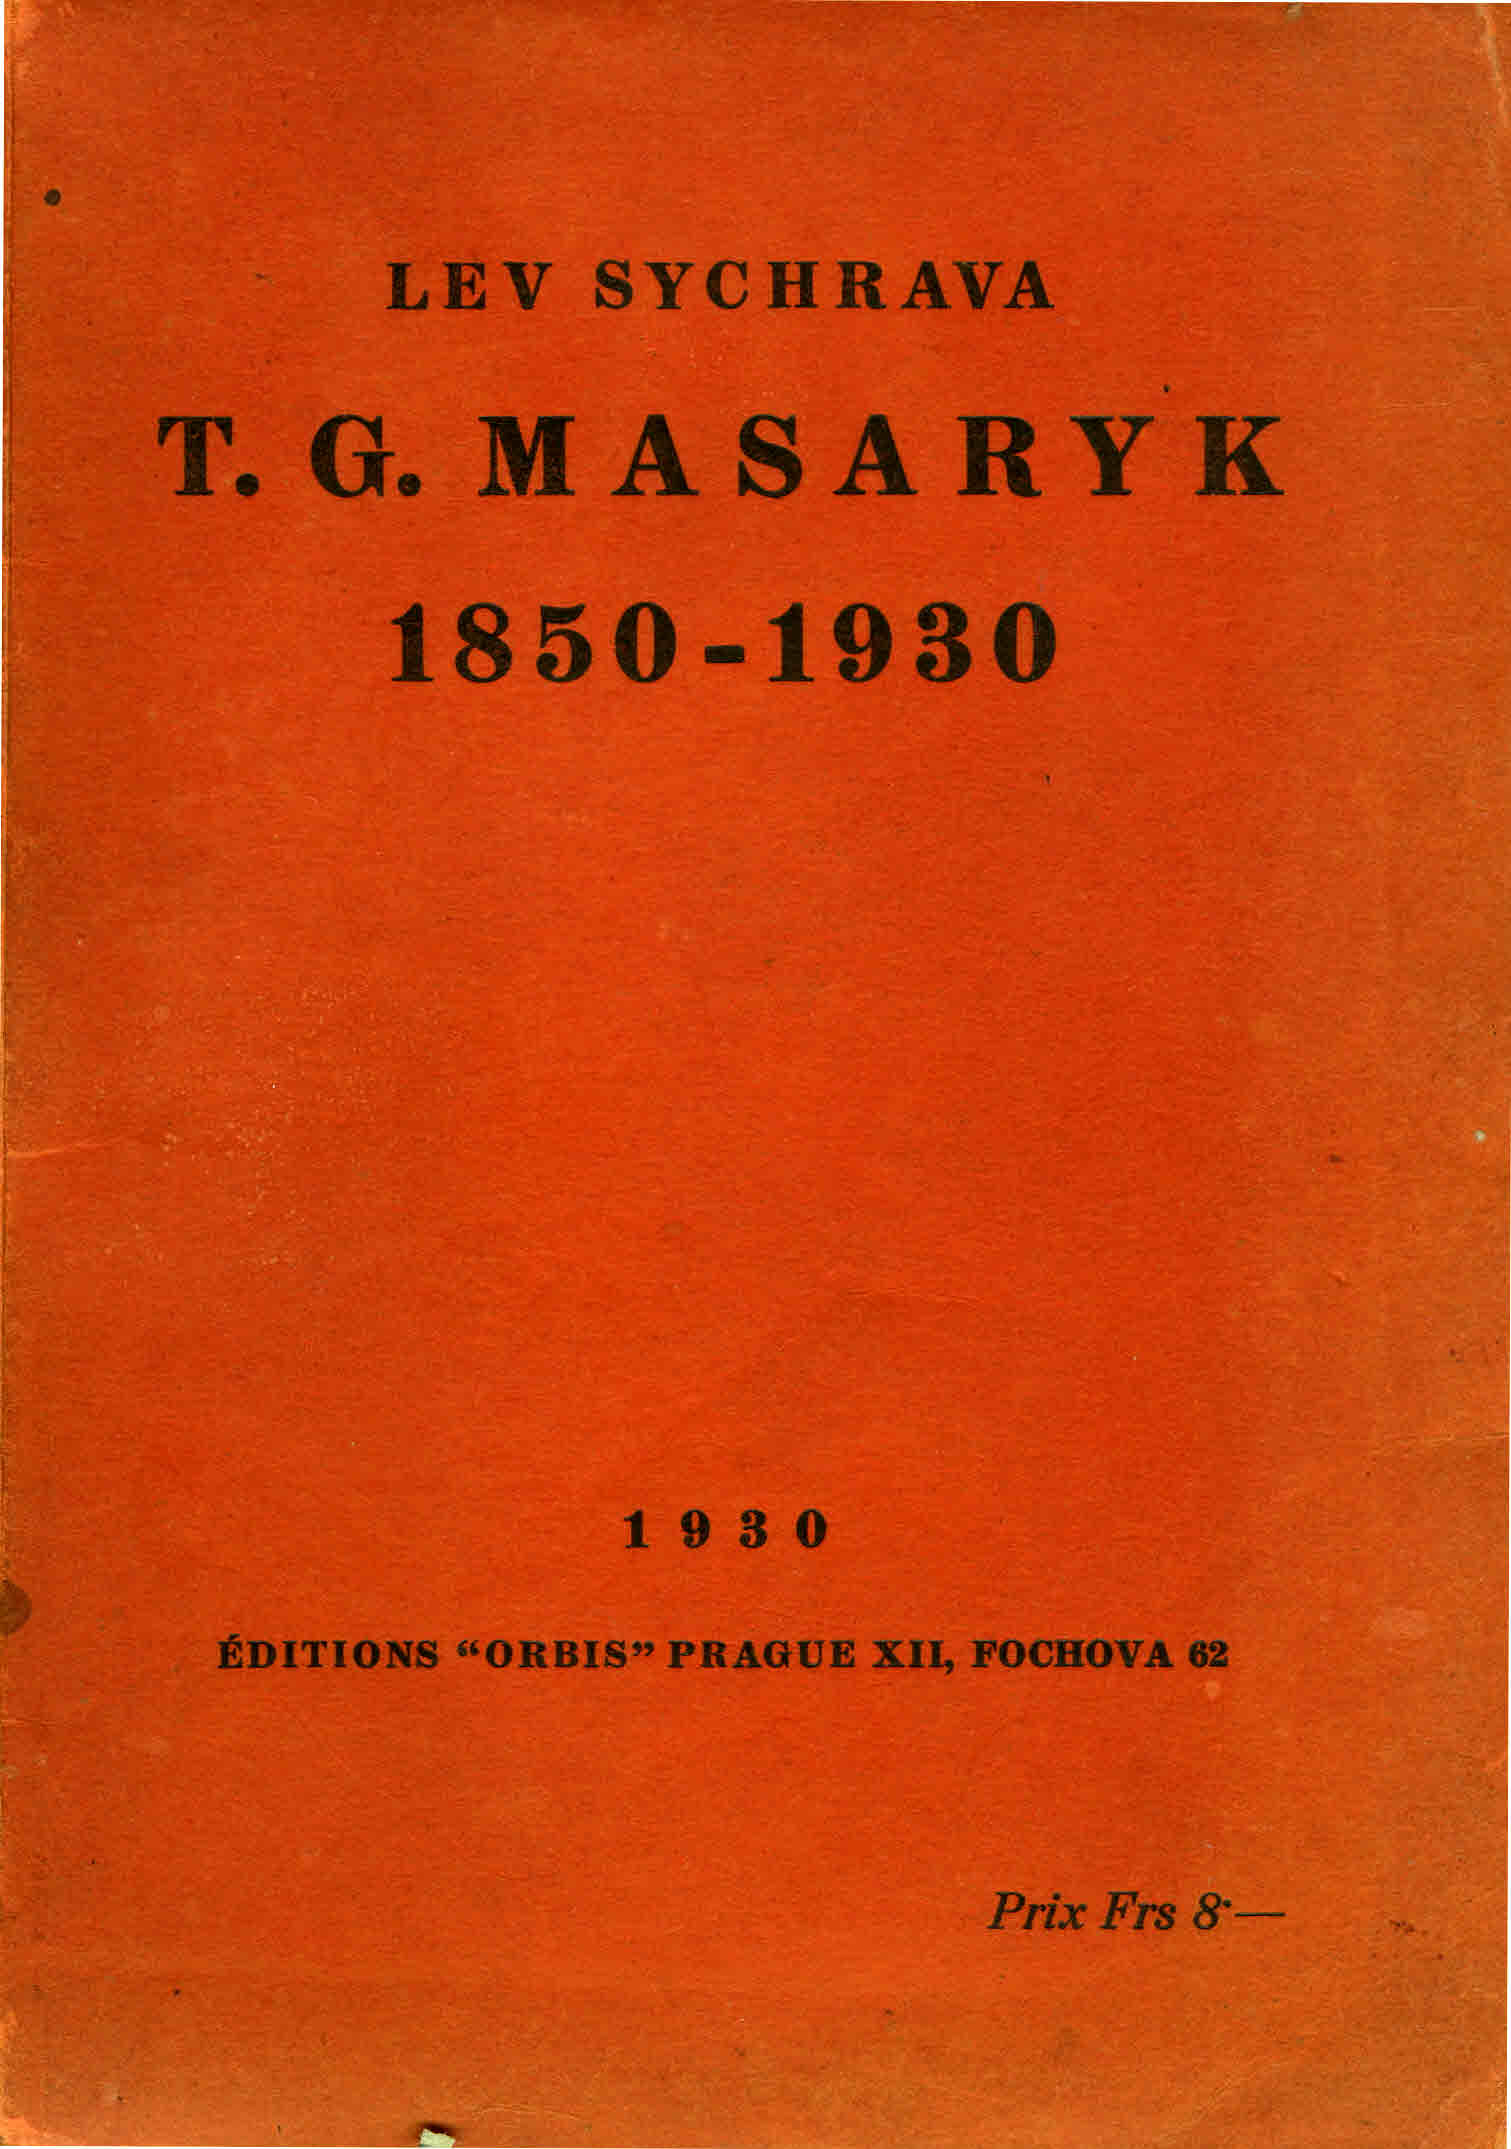 T. G. MASARYK 1850-1930 Cover Image